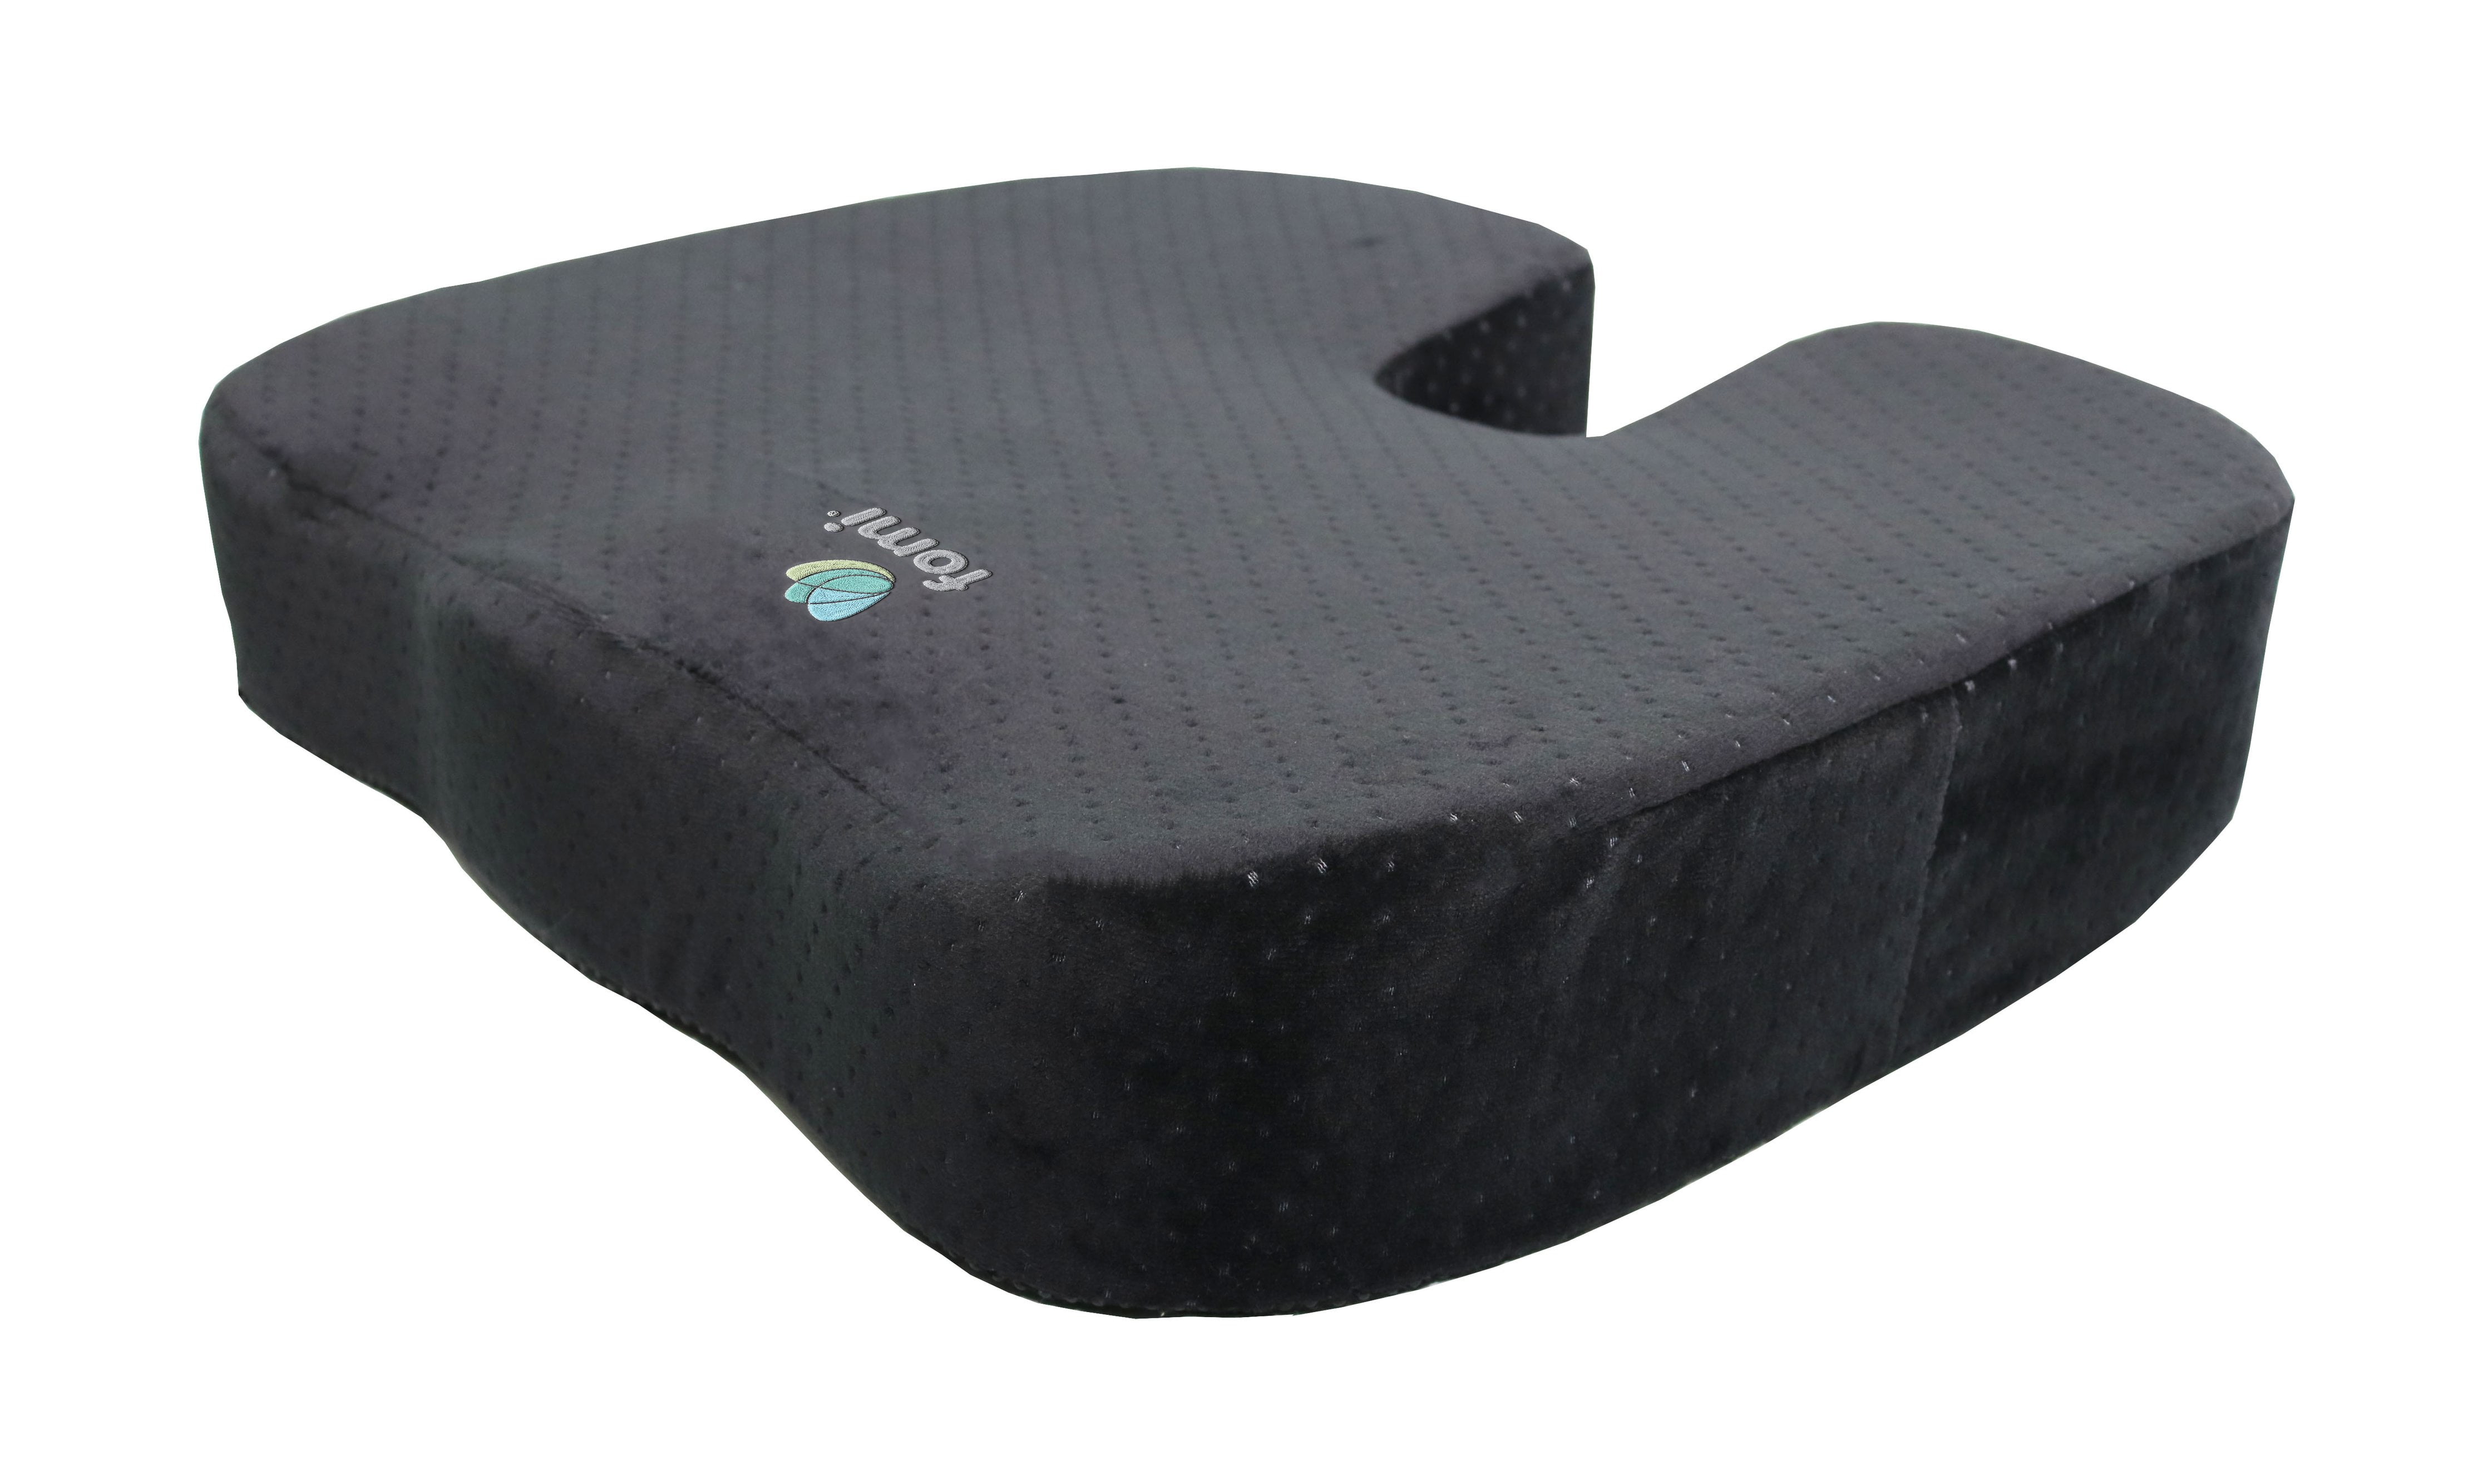 Extra Thick Coccyx Orthopedic Memory Foam Seat Cushion by FOMI